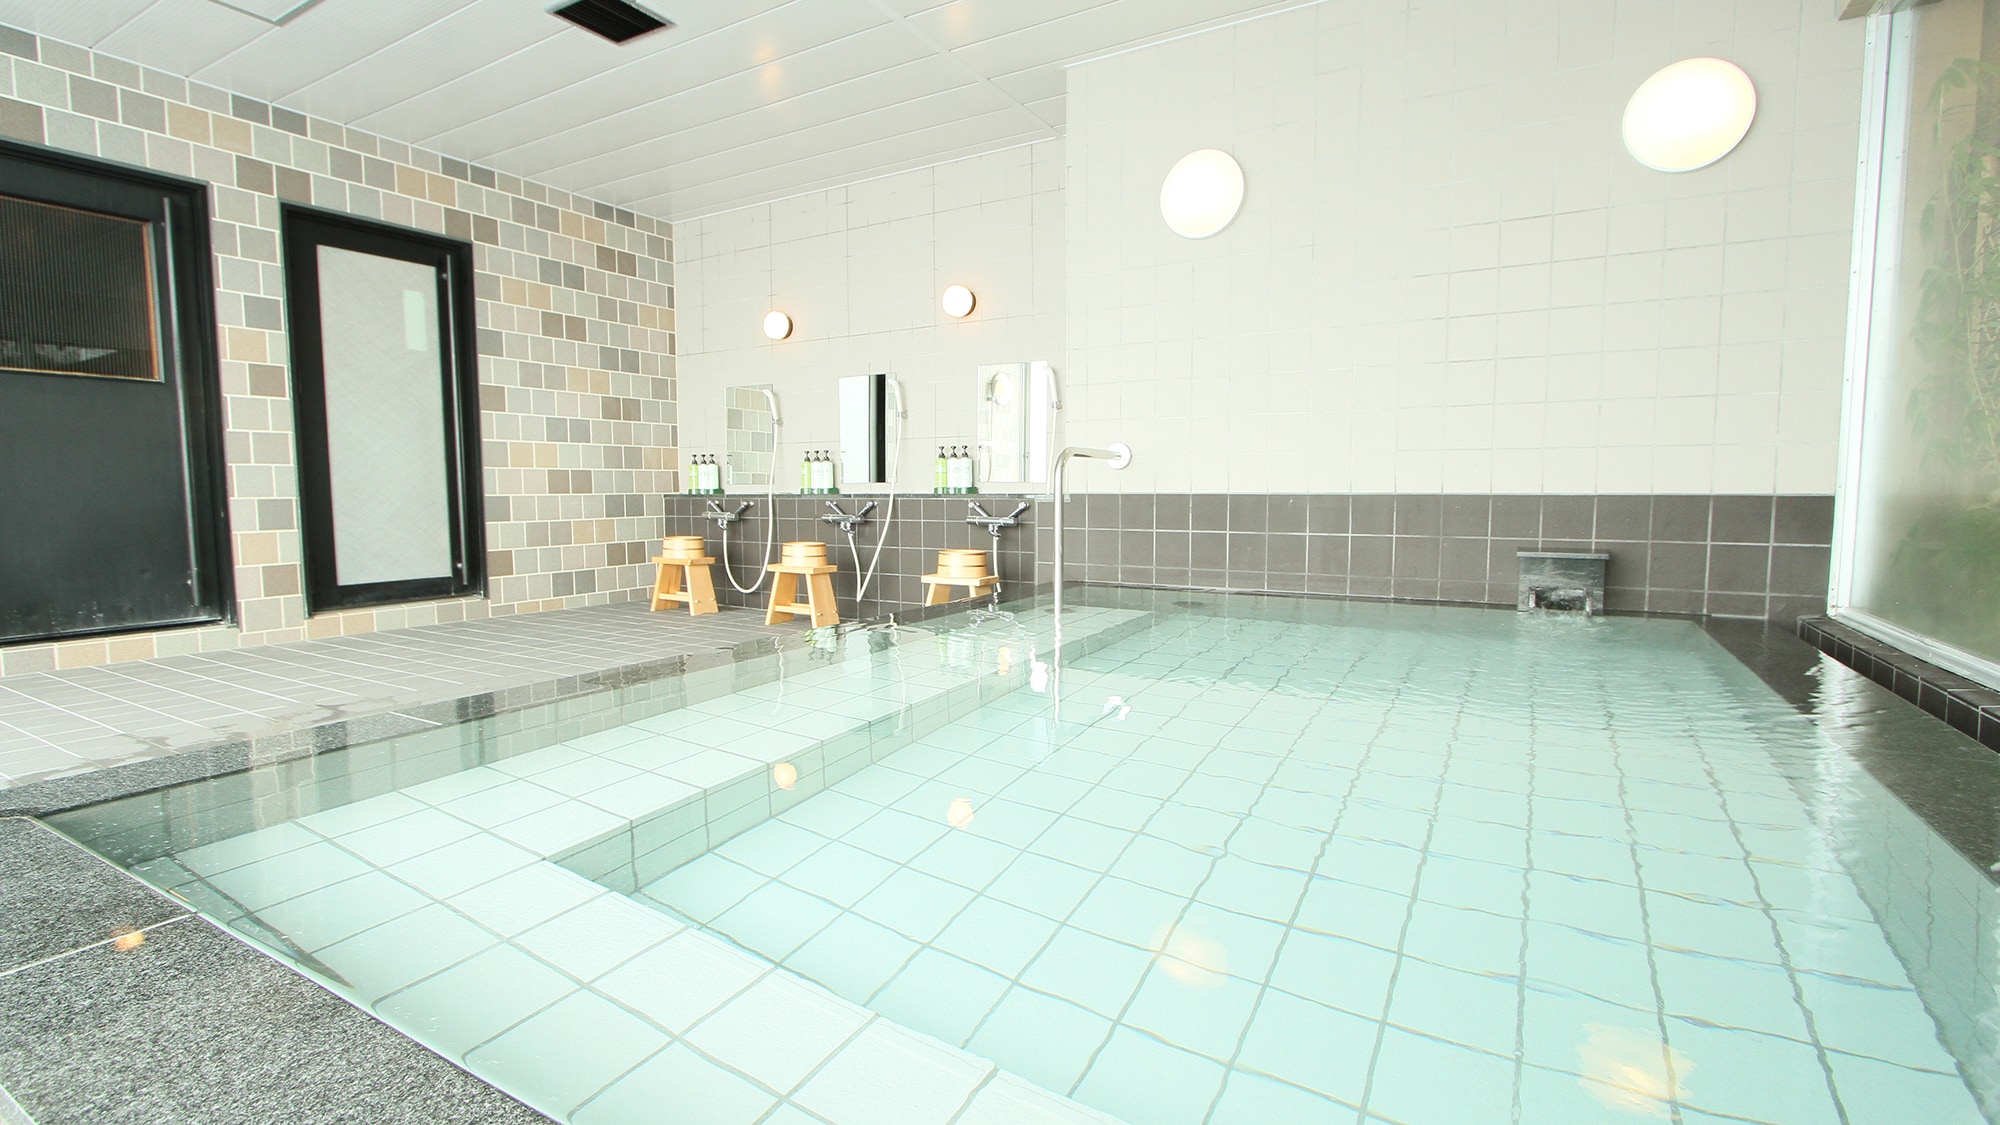 [Top floor bathhouse] Guests can use it free of charge ♪